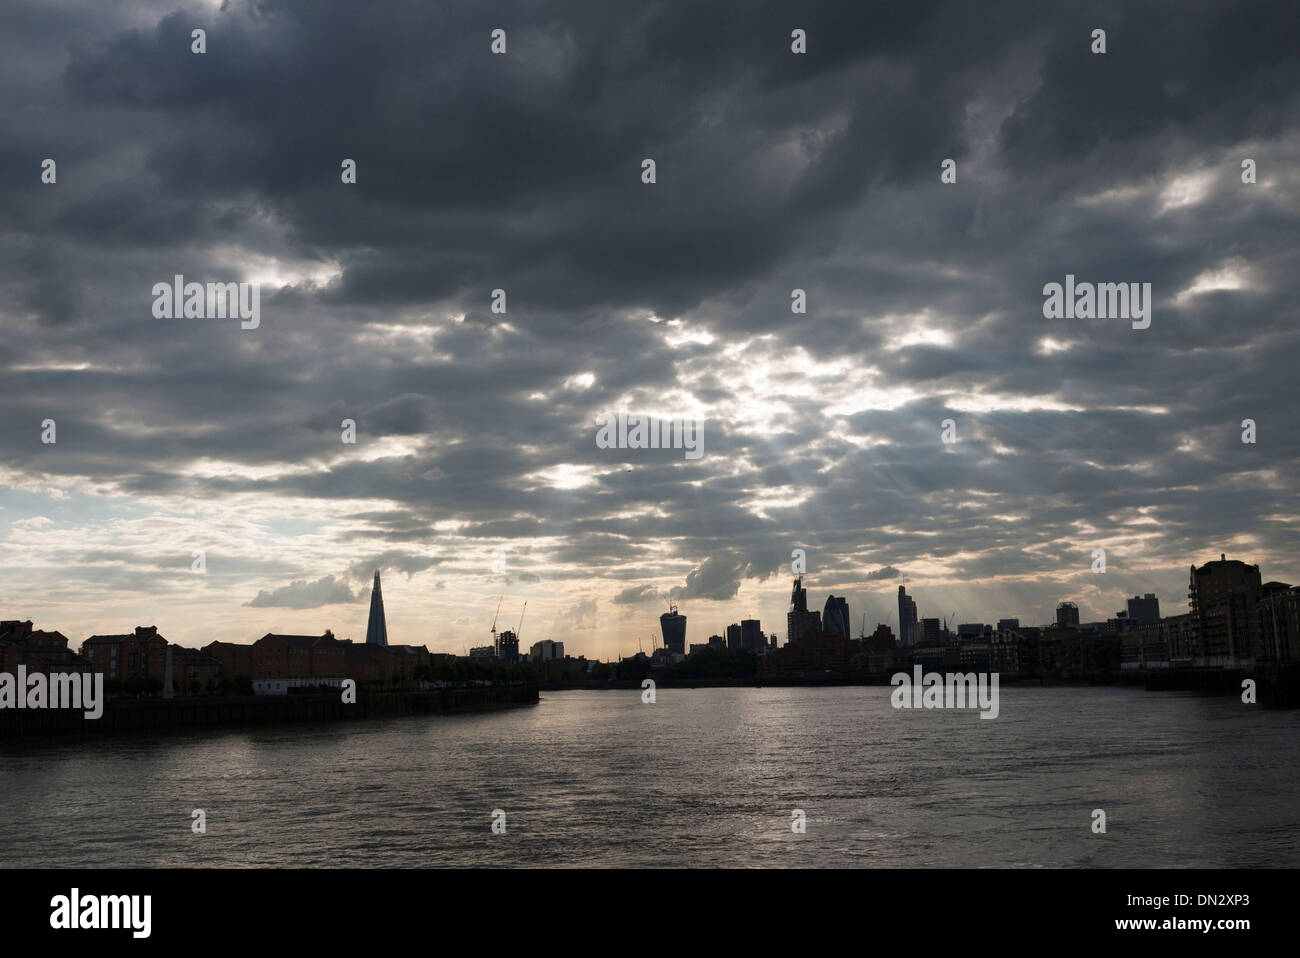 Sunlight breaking through clouds over the River Thames and the City skyline from East London, UK. Stock Photo